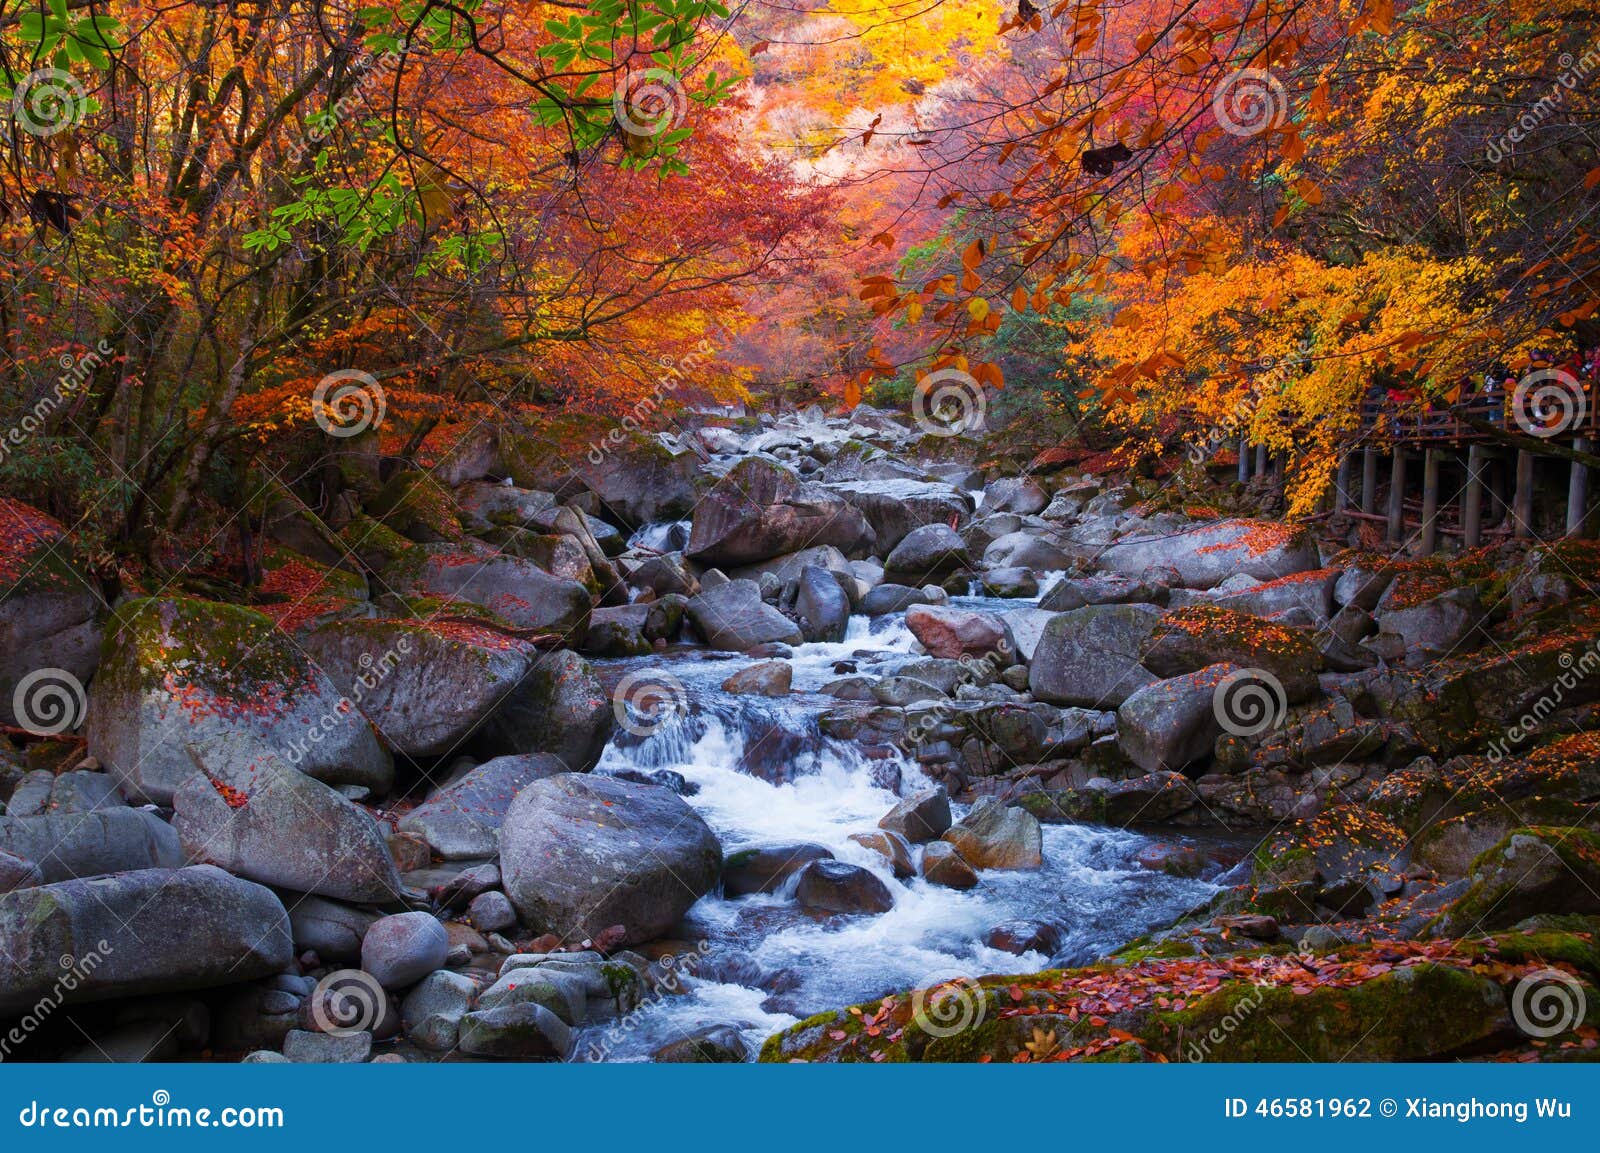 golden fall forest and stream